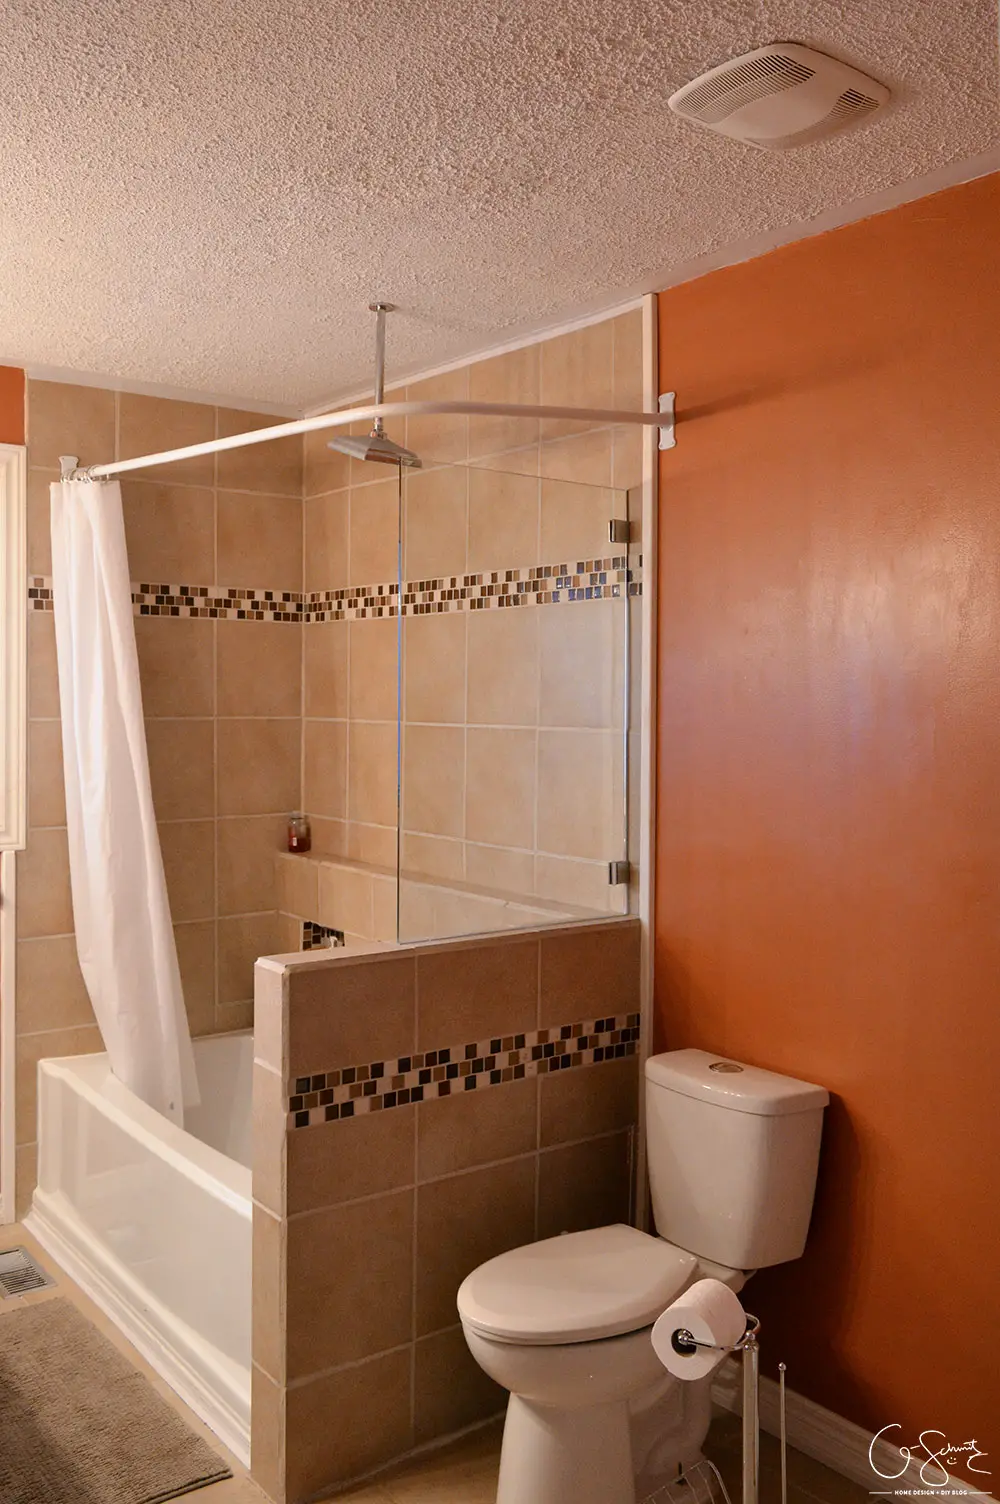 Have you ever tackled your own DIY bathroom renovation? Here is what our main bath looks like after we did ours! 